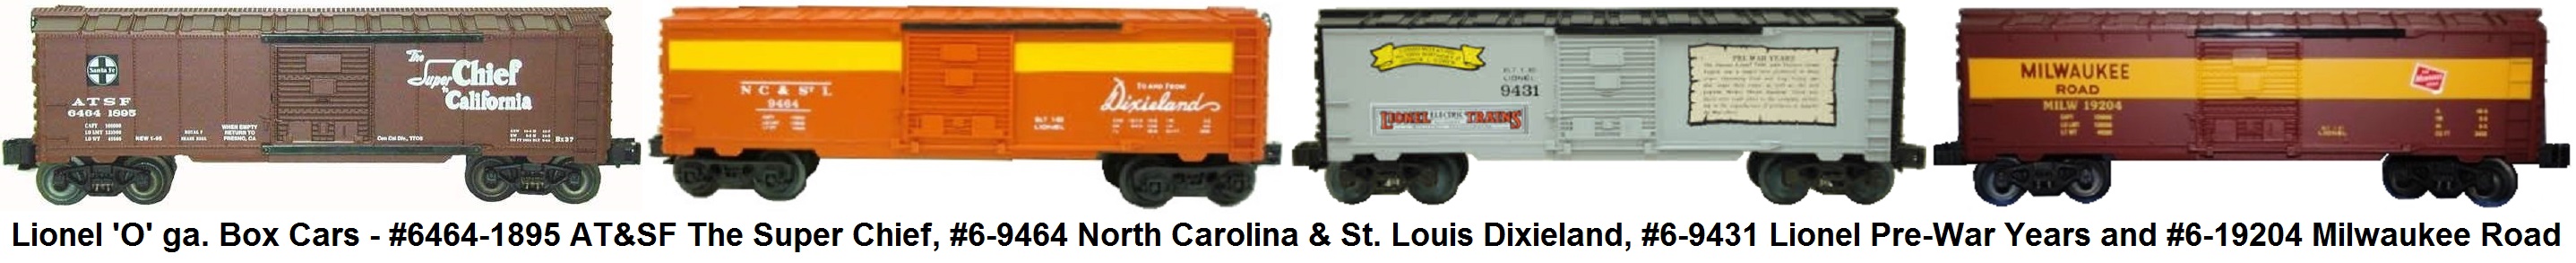 Lionel 'O' gauge #6464-1895 AT&SF The Super Chief, #6-9464 North Carolina & St. Louis Dixieland, #6-9431 Lionel Pre-war Years and #6-19204 Milwaukee Road Box Cars